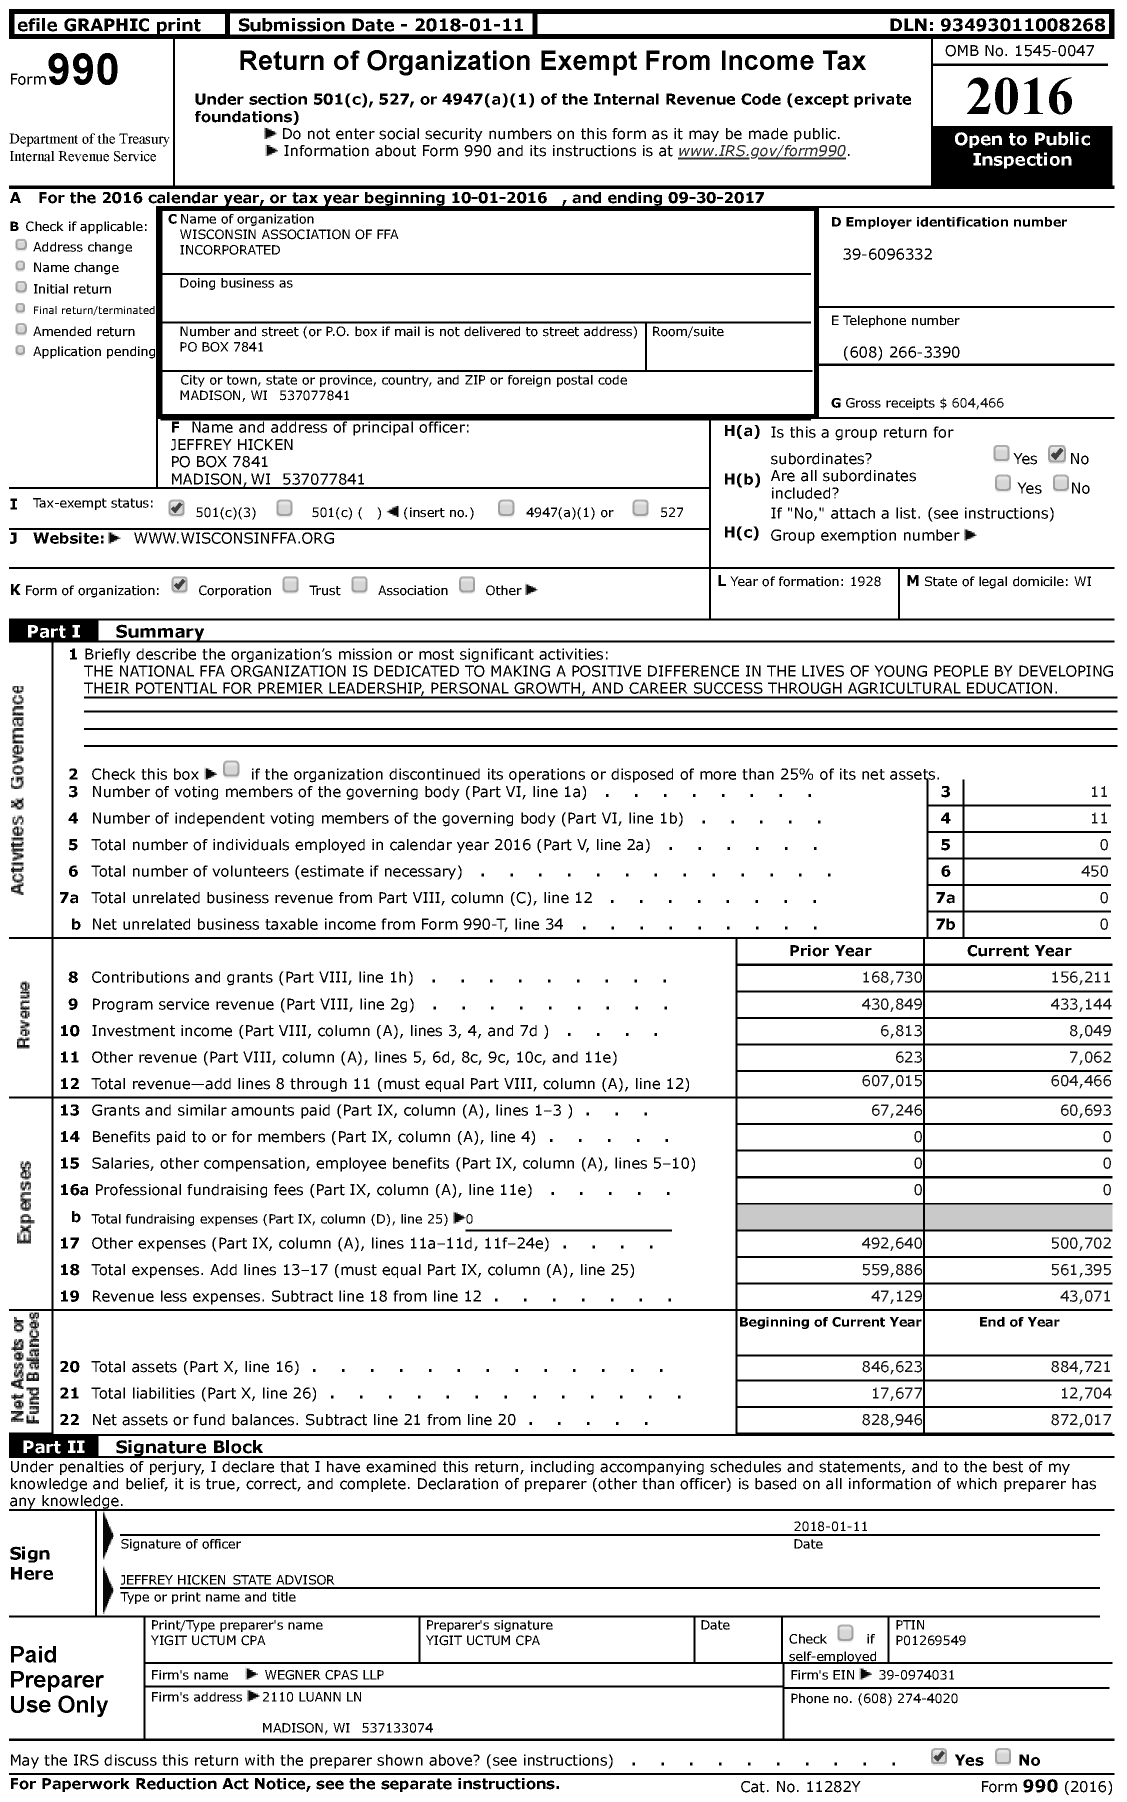 Image of first page of 2016 Form 990 for Wisconsin Association of Ffa Incorporated